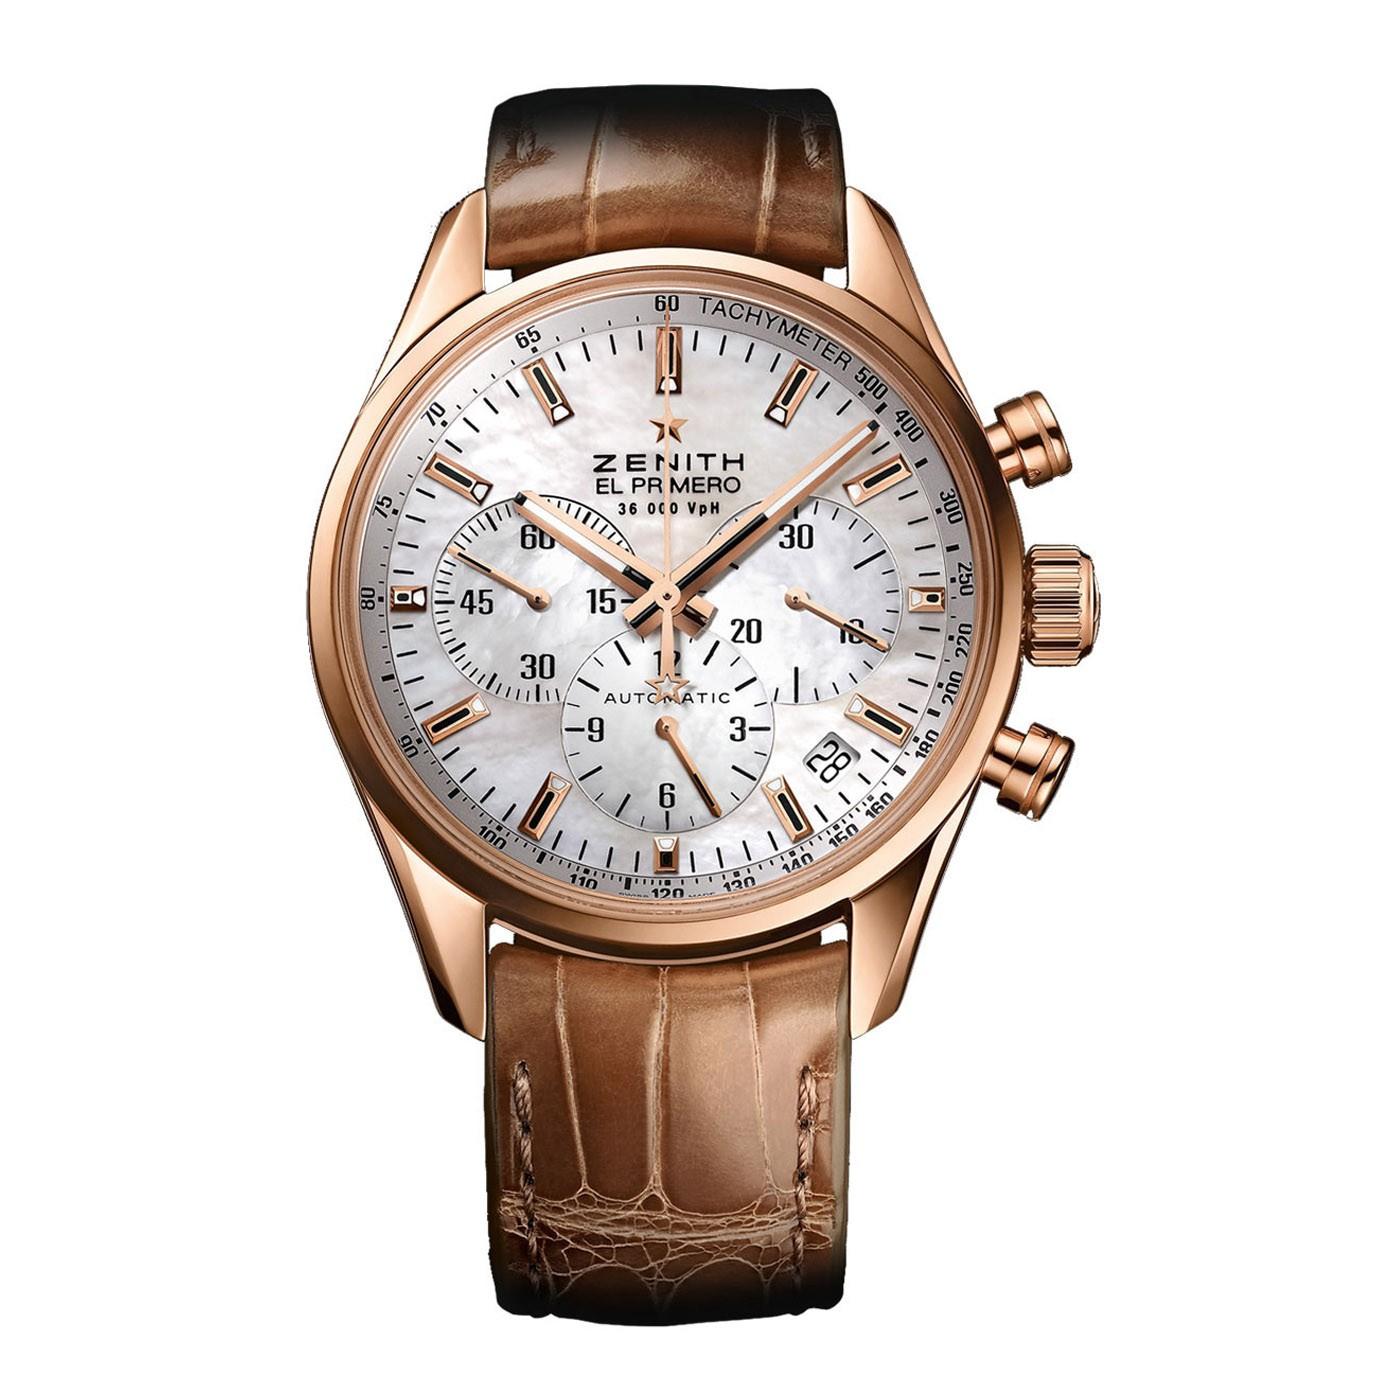 El Primero Lady 36'000 VPH in Rose Gold on Brown Alligator Leather Strap with MOP Dial